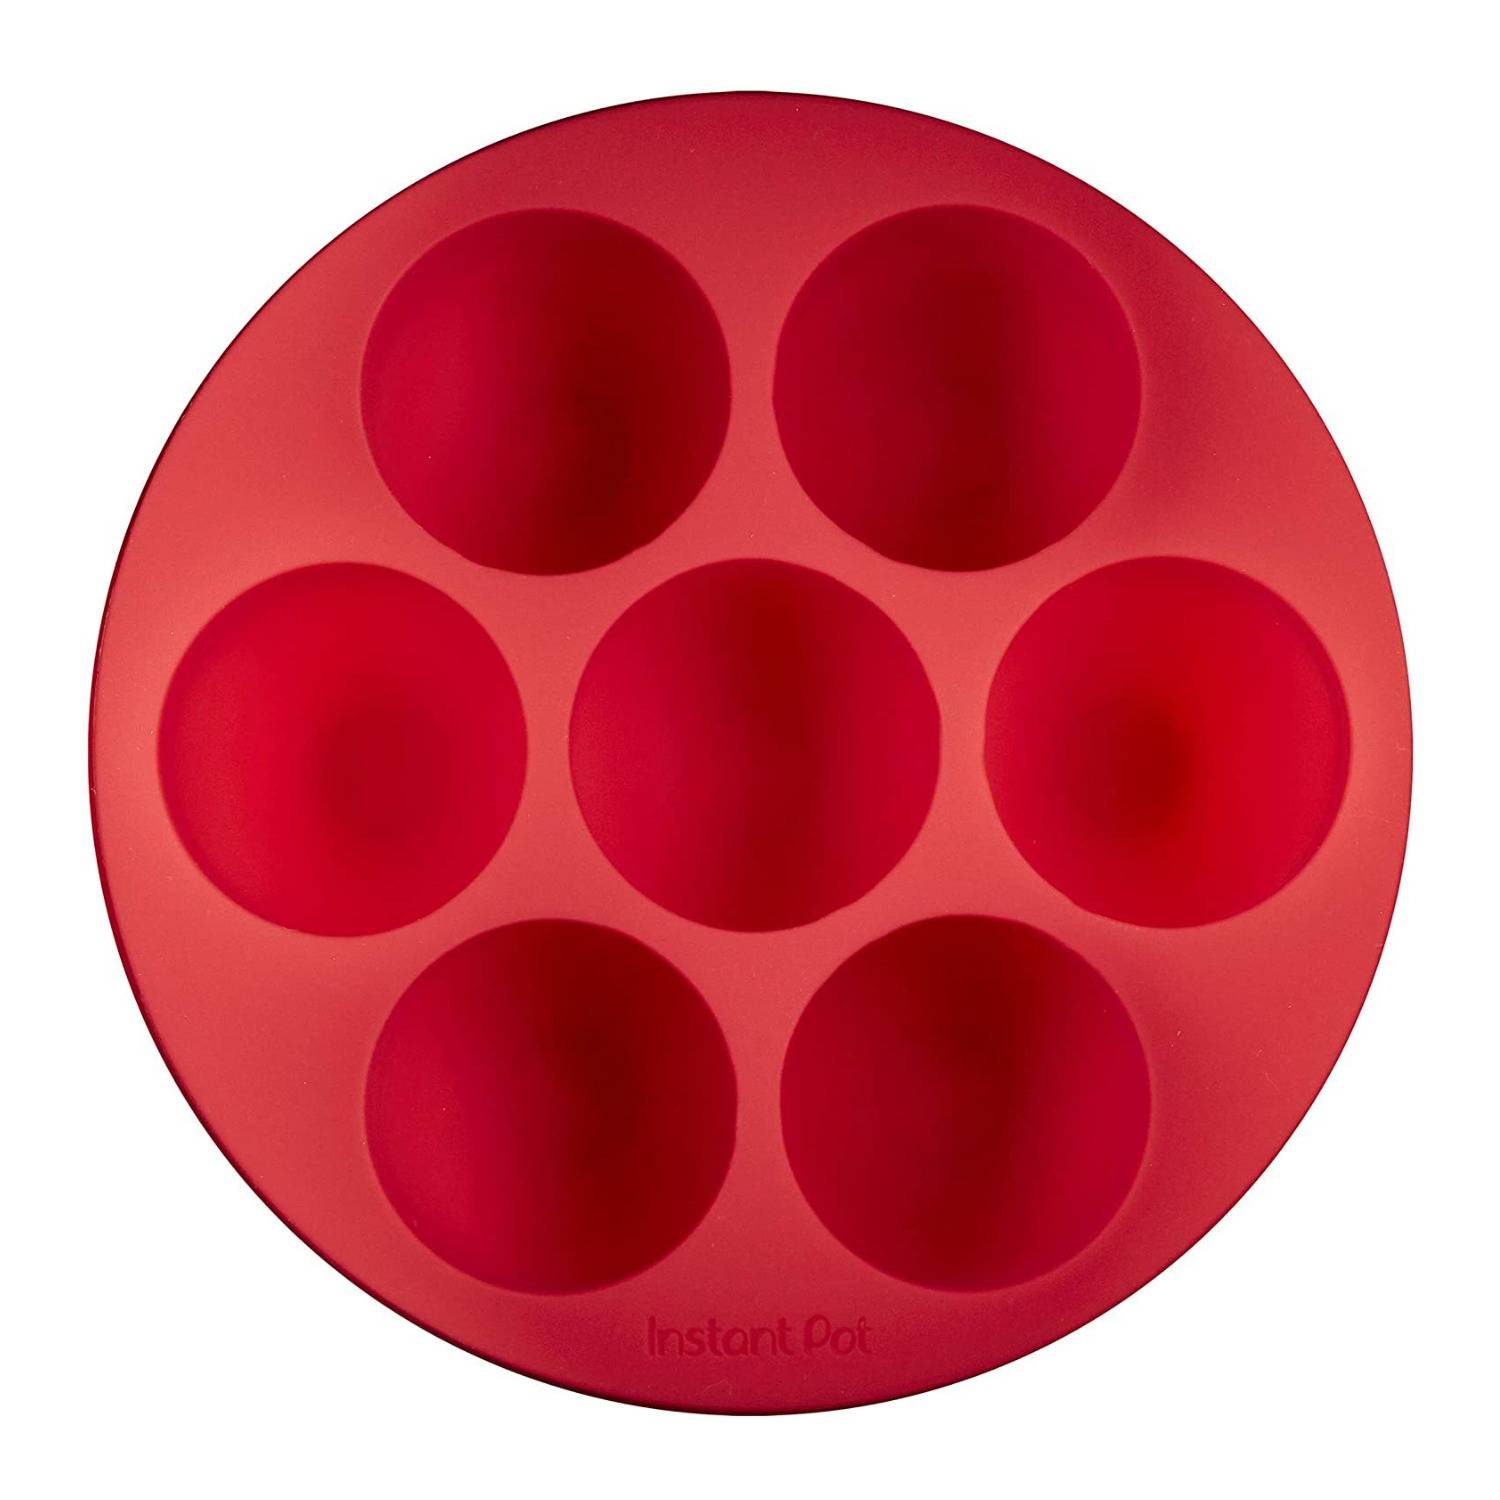 Instant Pot Silicone Egg Bites Pan with Lid (Red)